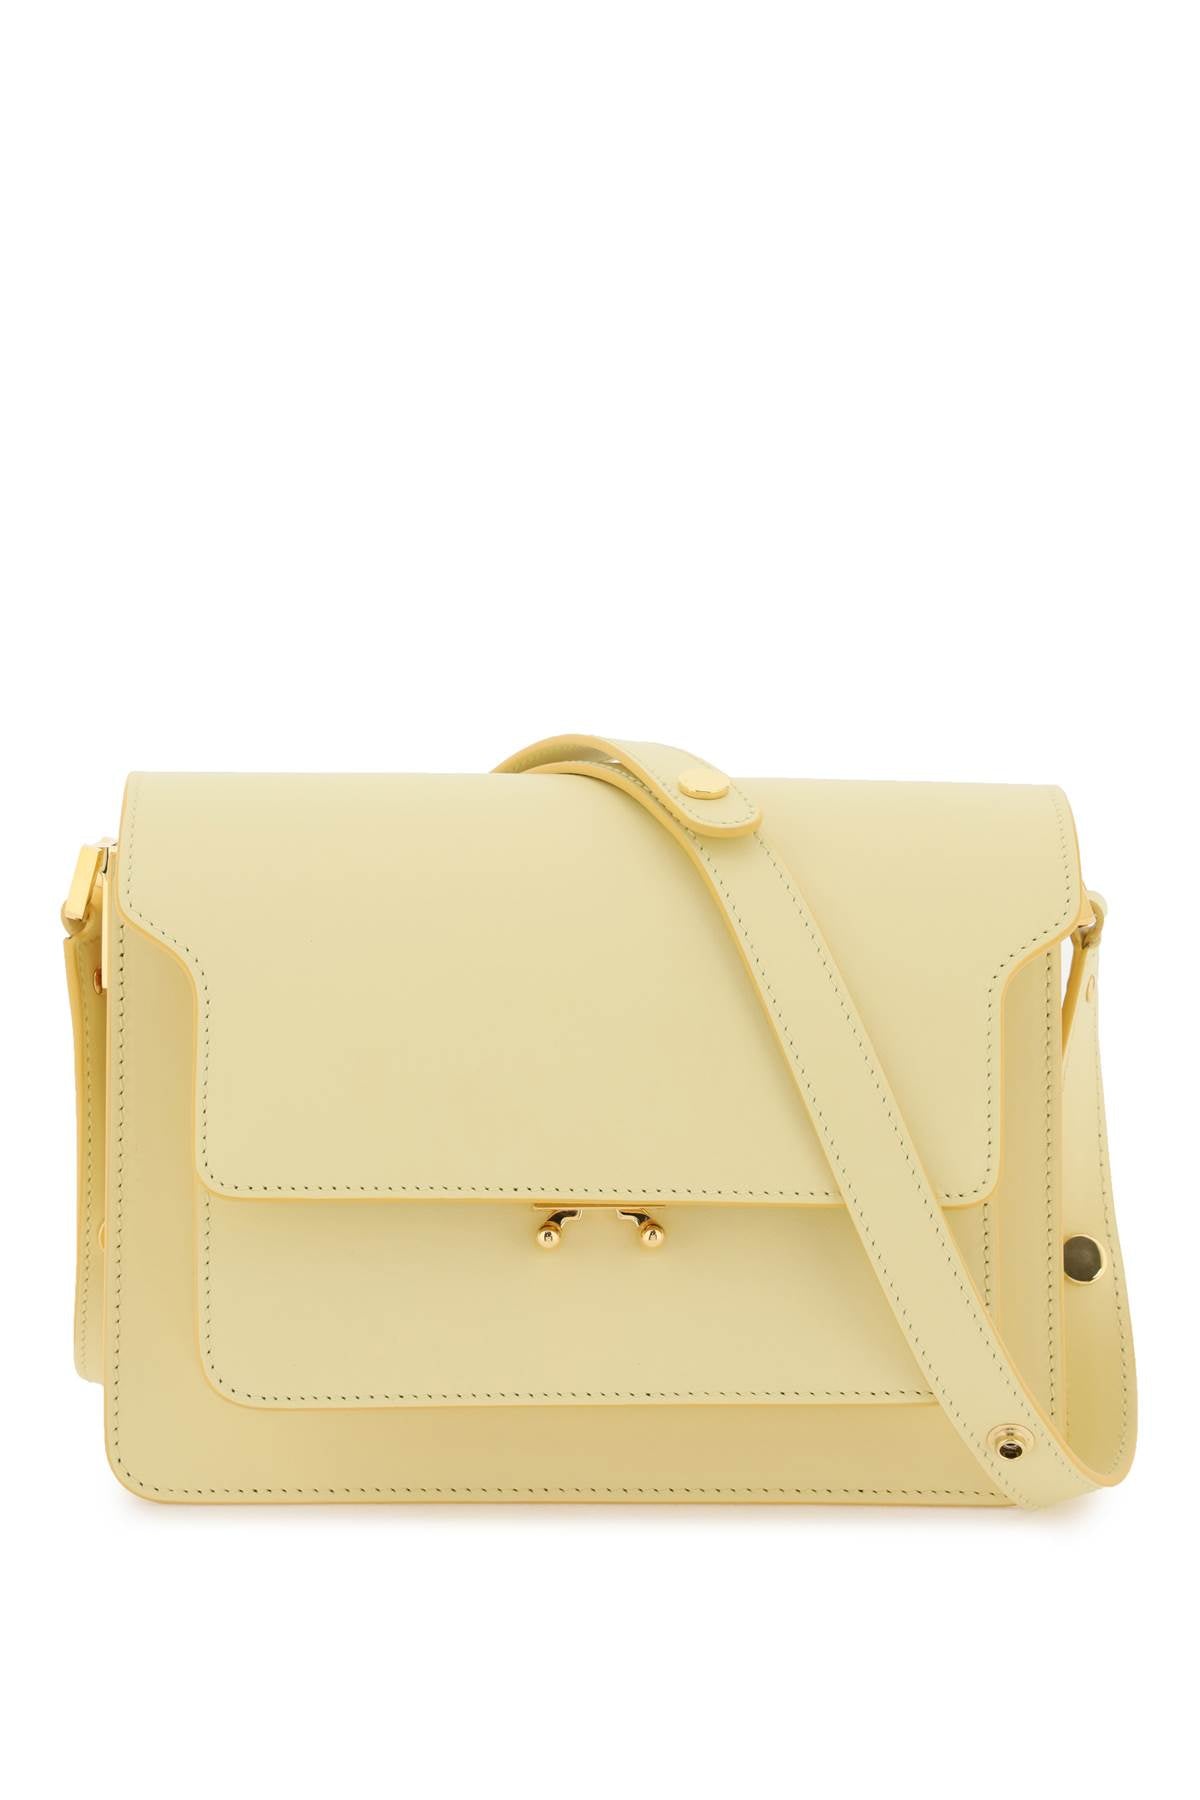 MARNI Fall/Winter 2023 Medium Trunk Leather Crossbody Handbag in Yellow with Adjustable Strap and Gold Hardware